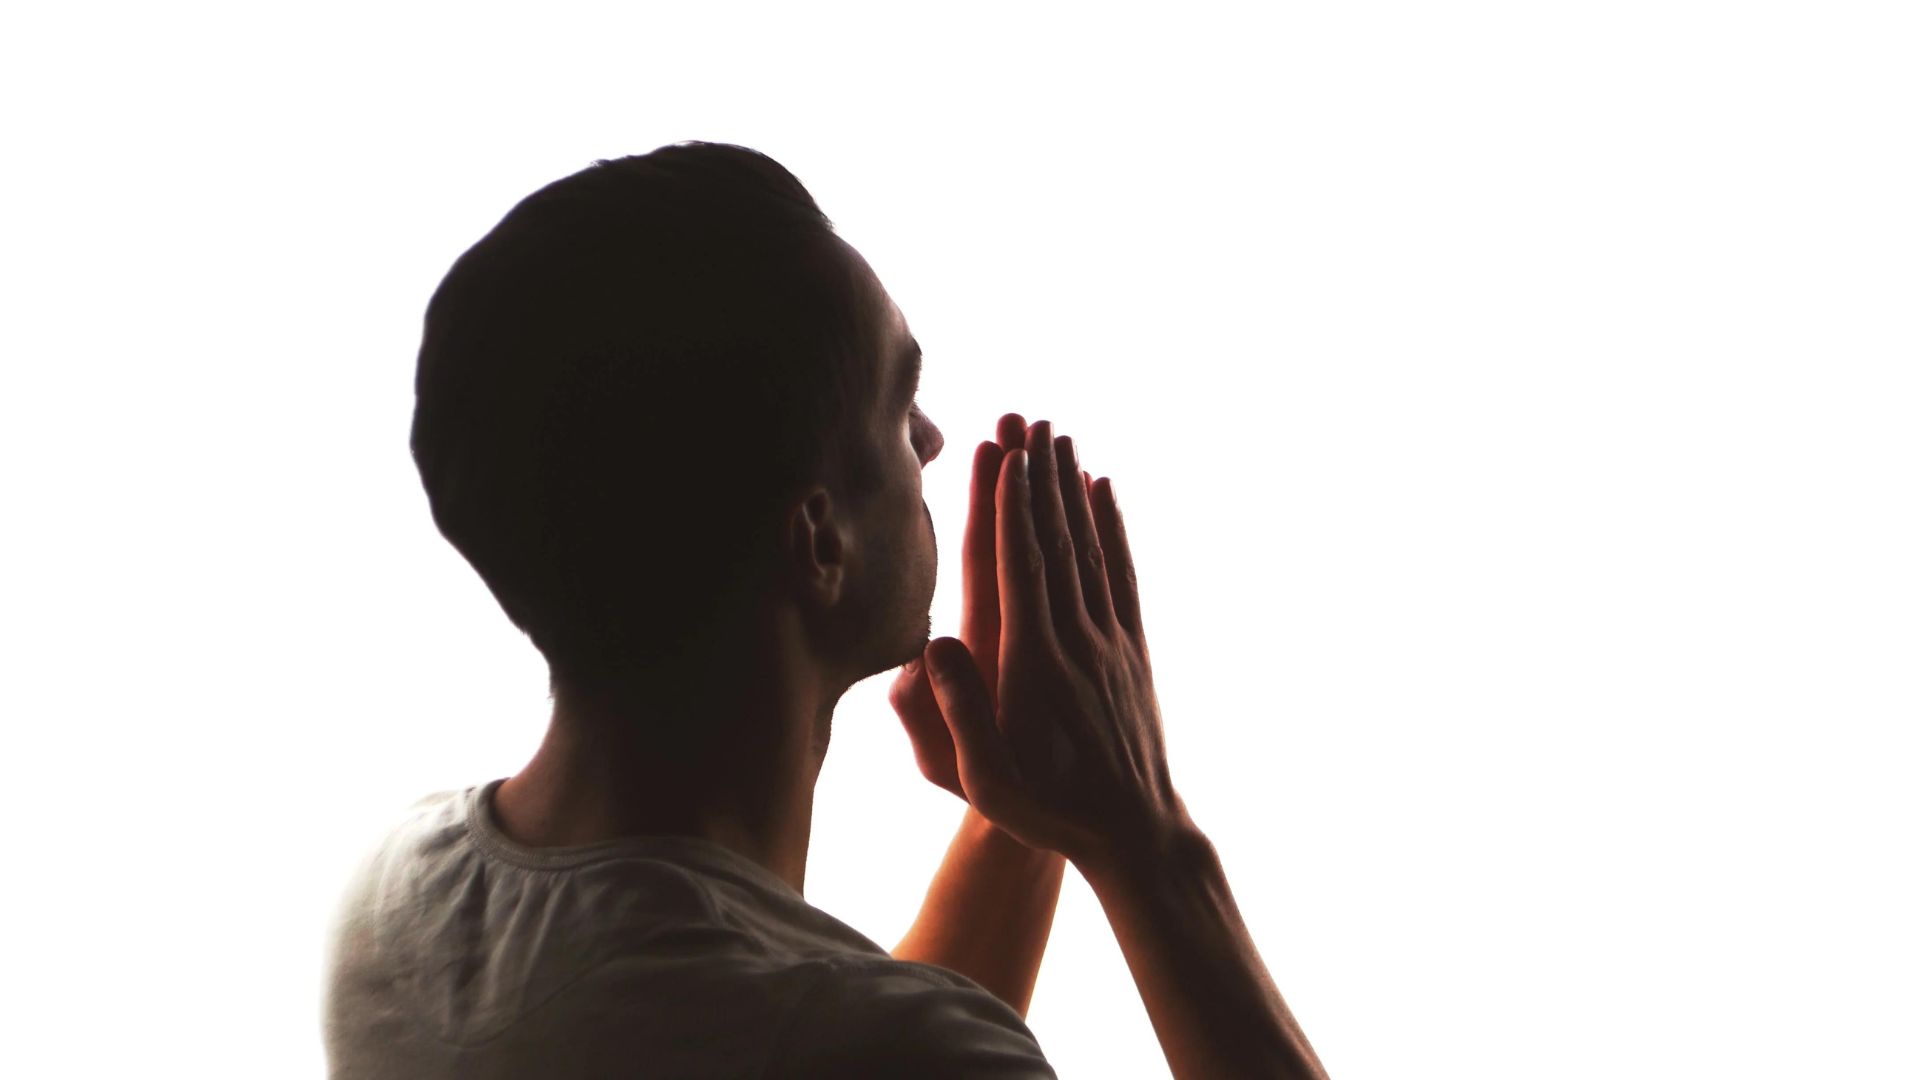 Man praying to God - Concept of faith and religion